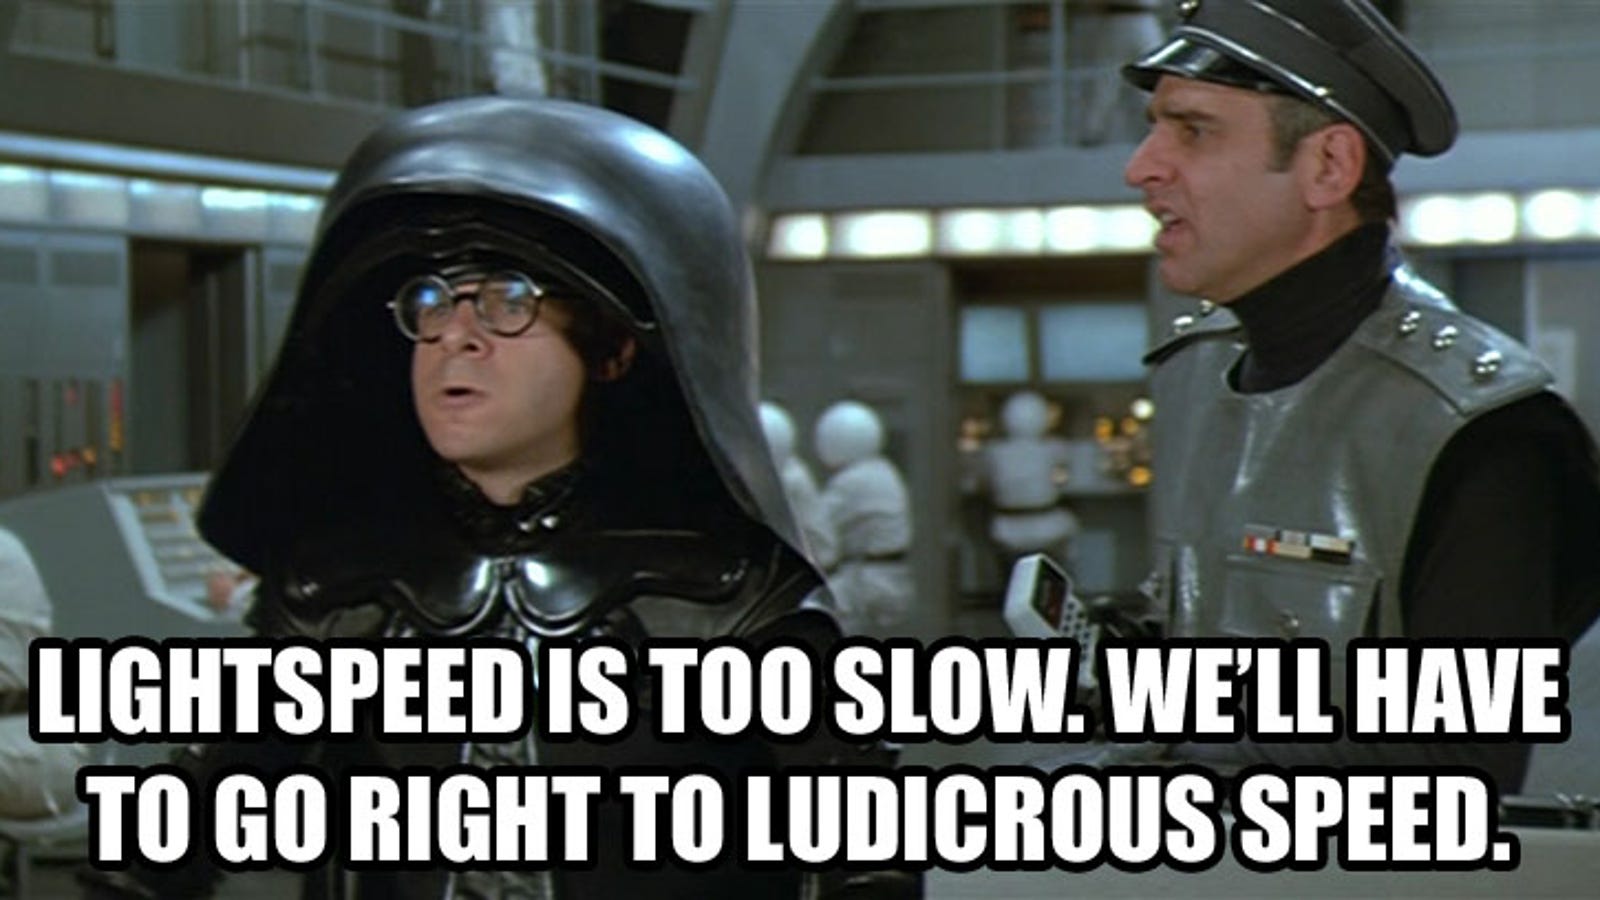 Image result for ludicrous speed